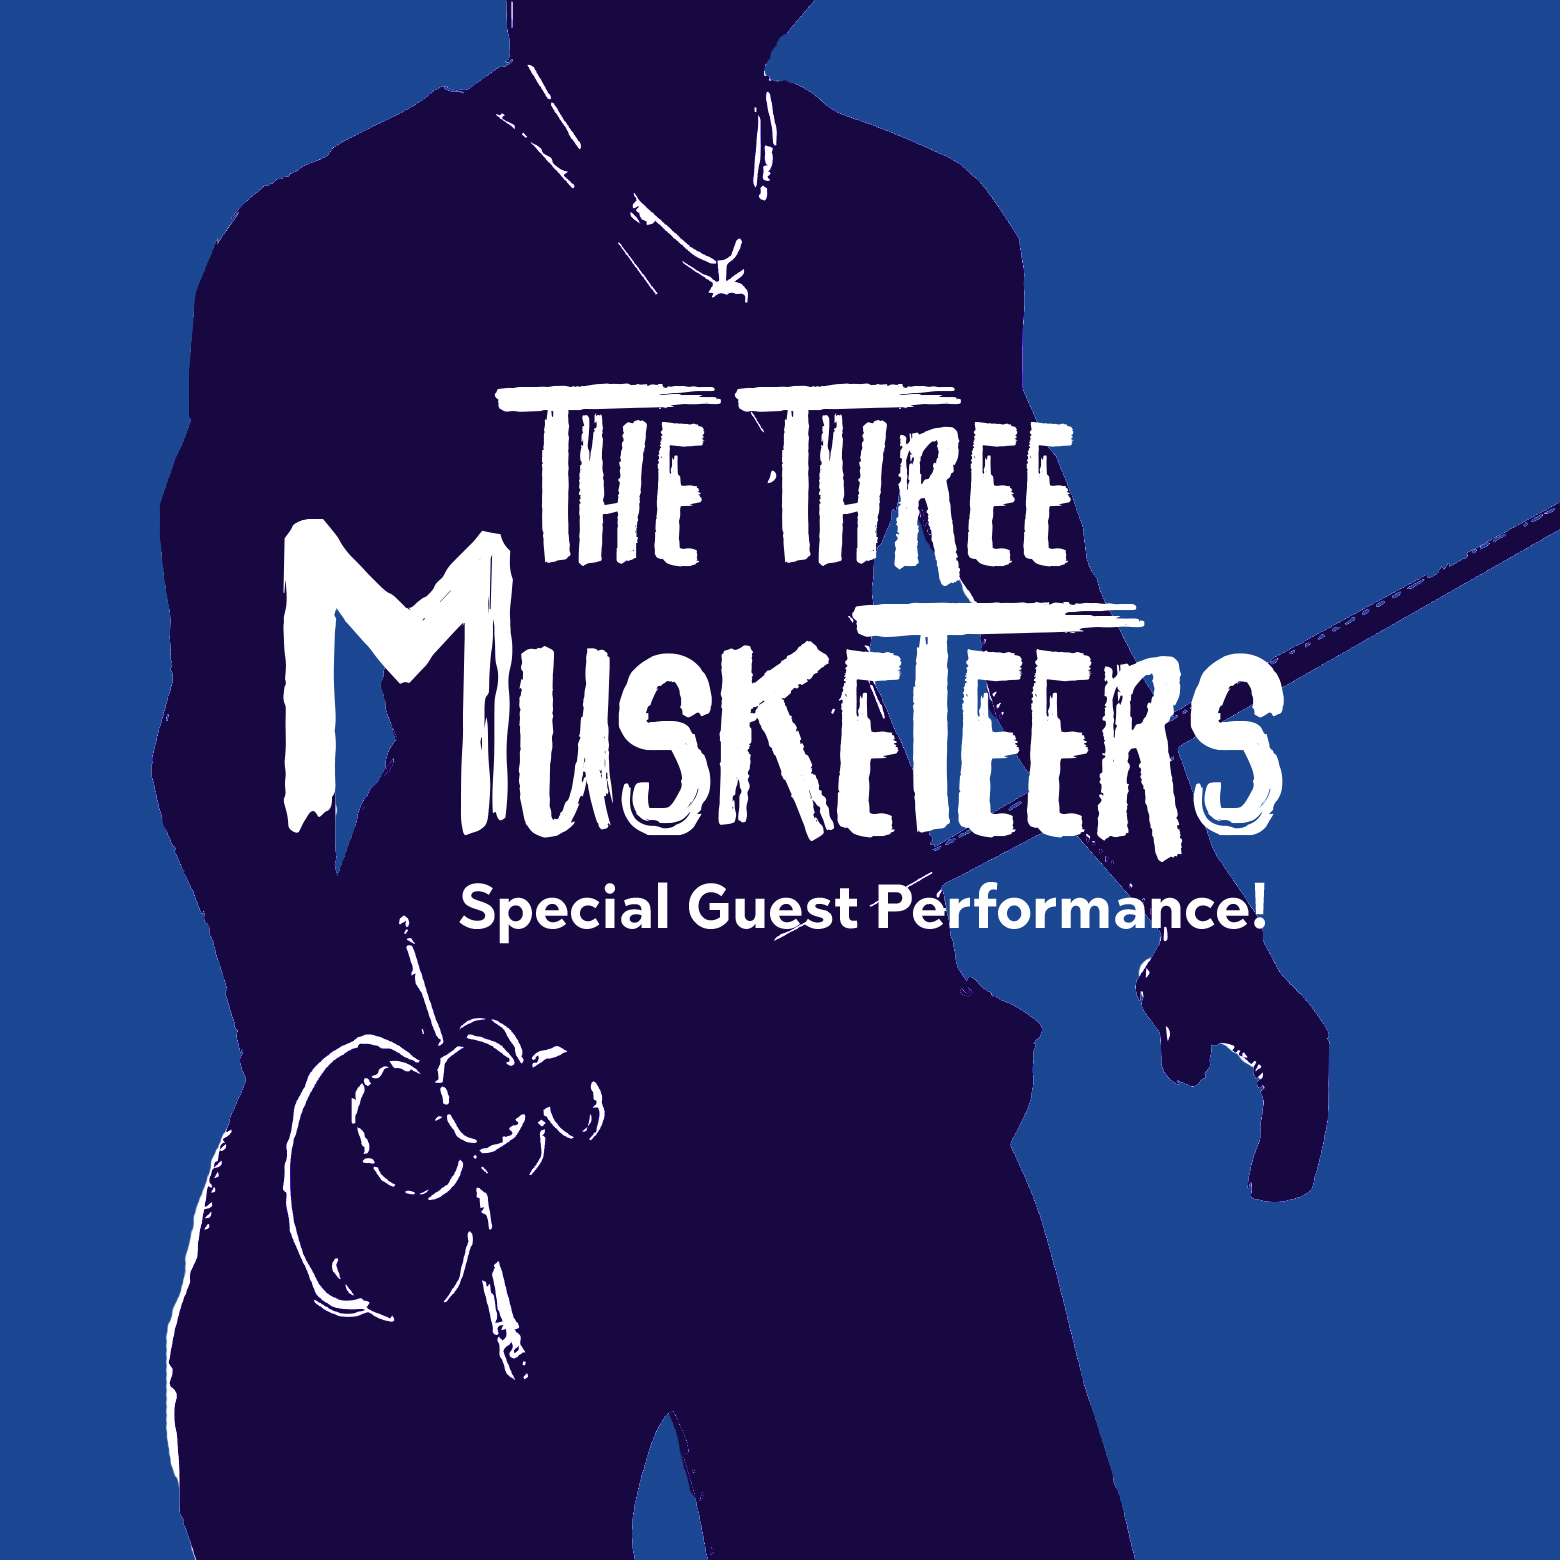 Design for The Three Musketeers